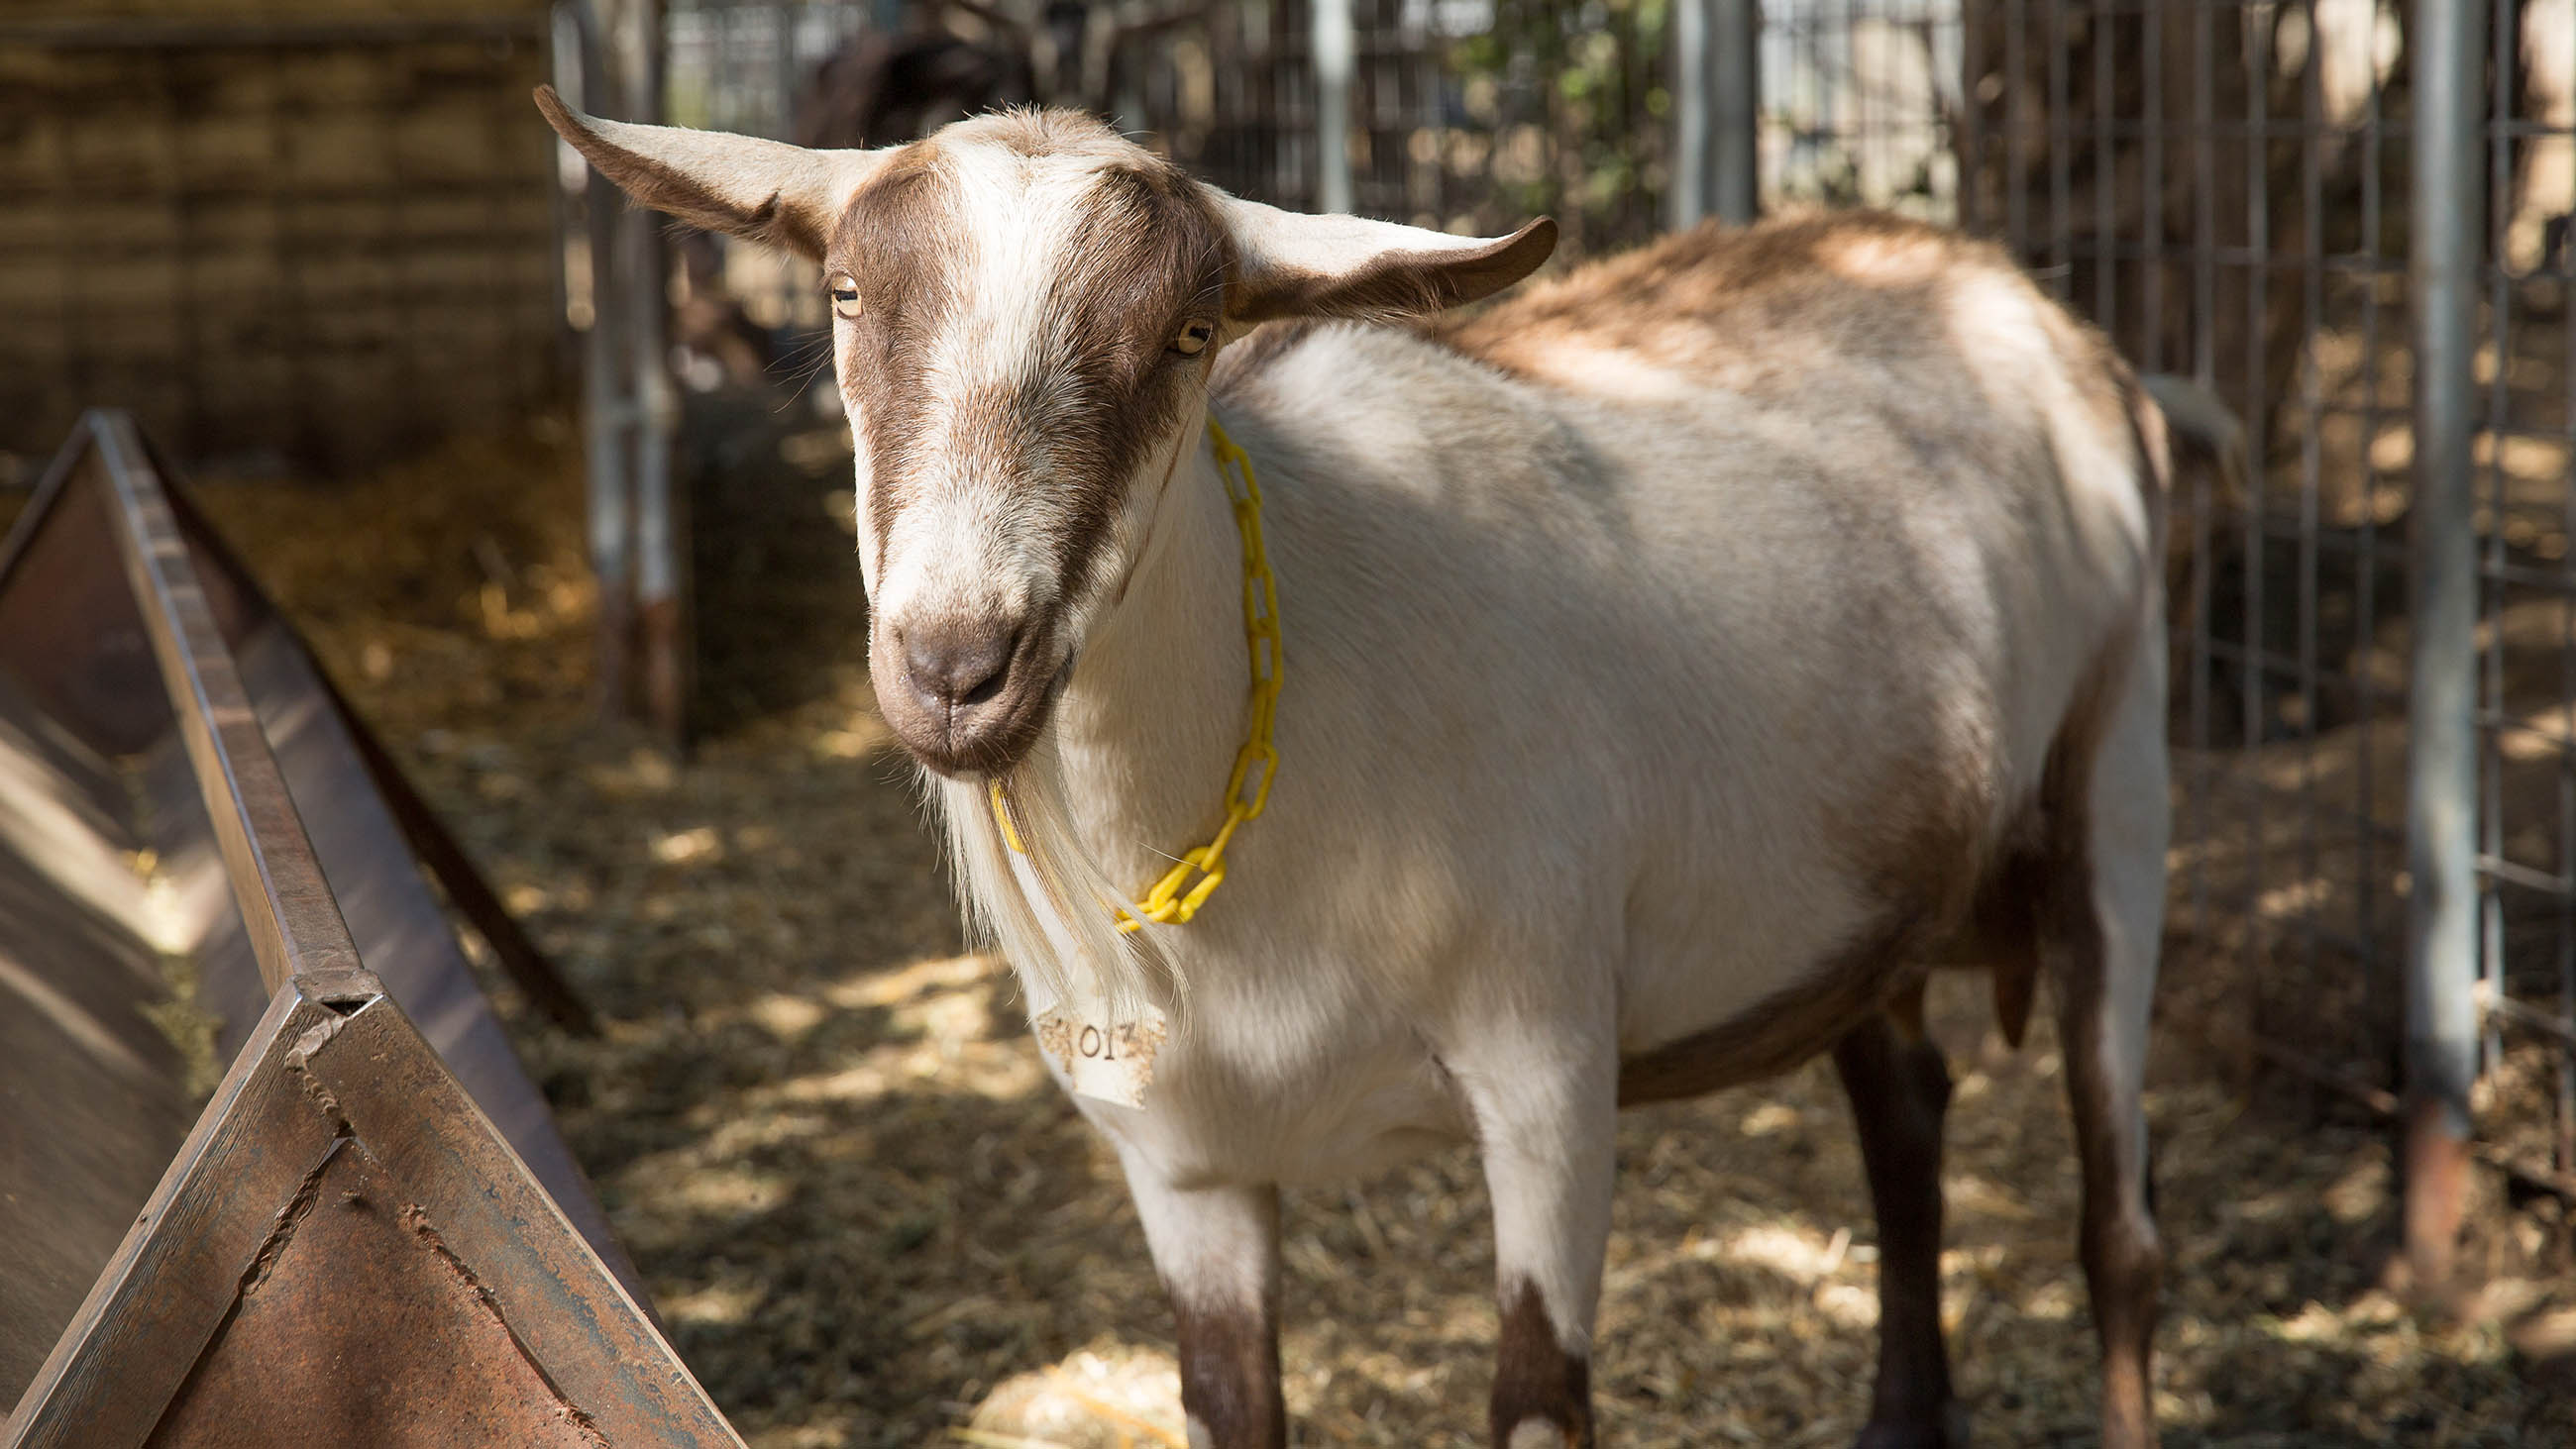 Researchers have genetically engineered goats that produce an antimicrobial enzyme in their milk. Without regulatory approval, however, they're just goats.